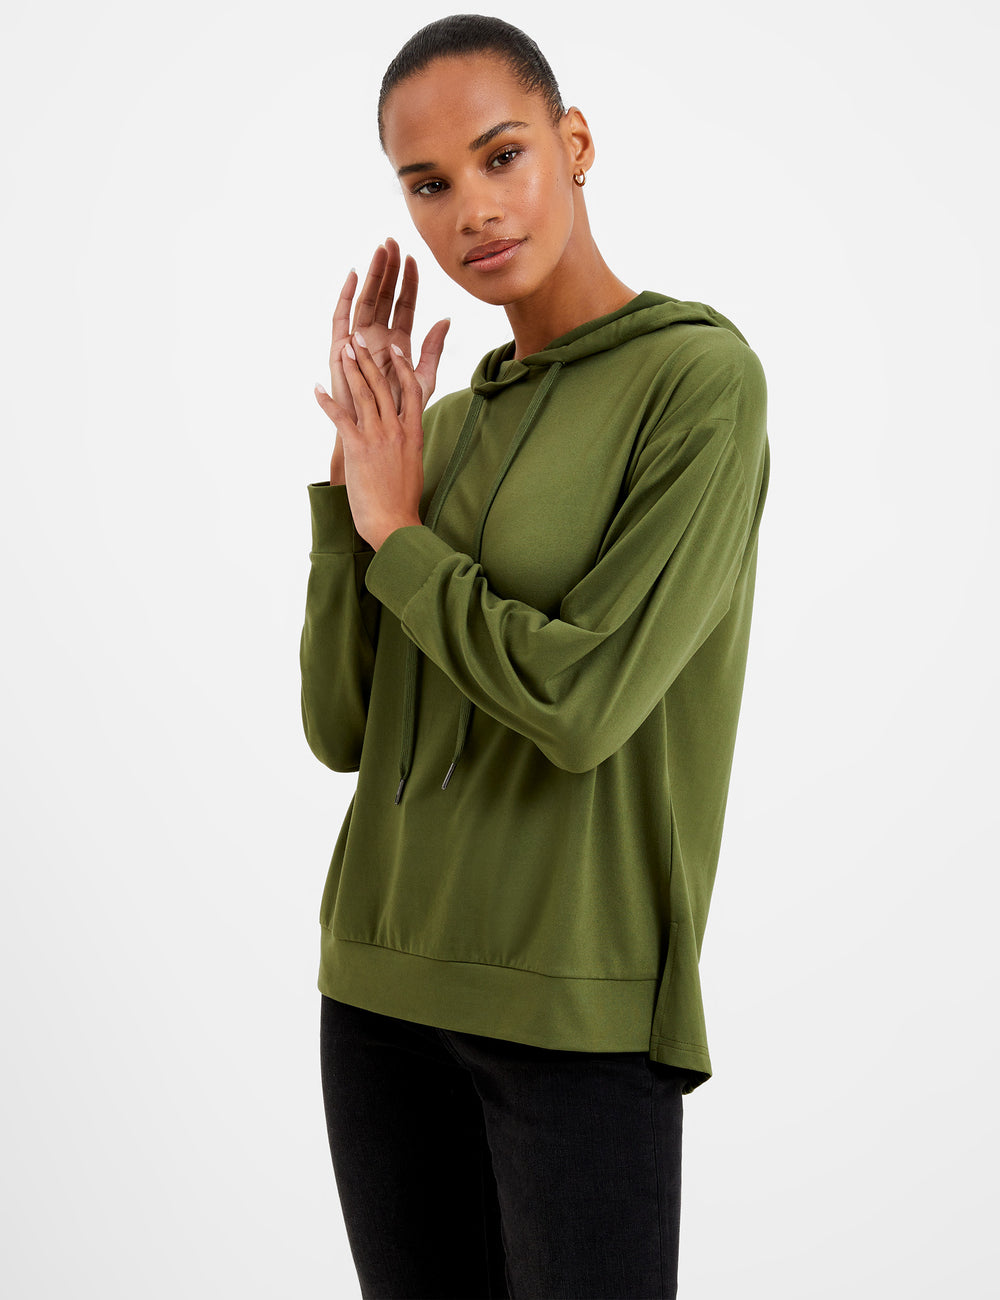 Overhead Formal Hooded Sweatshirt Olive Green | French Connection UK